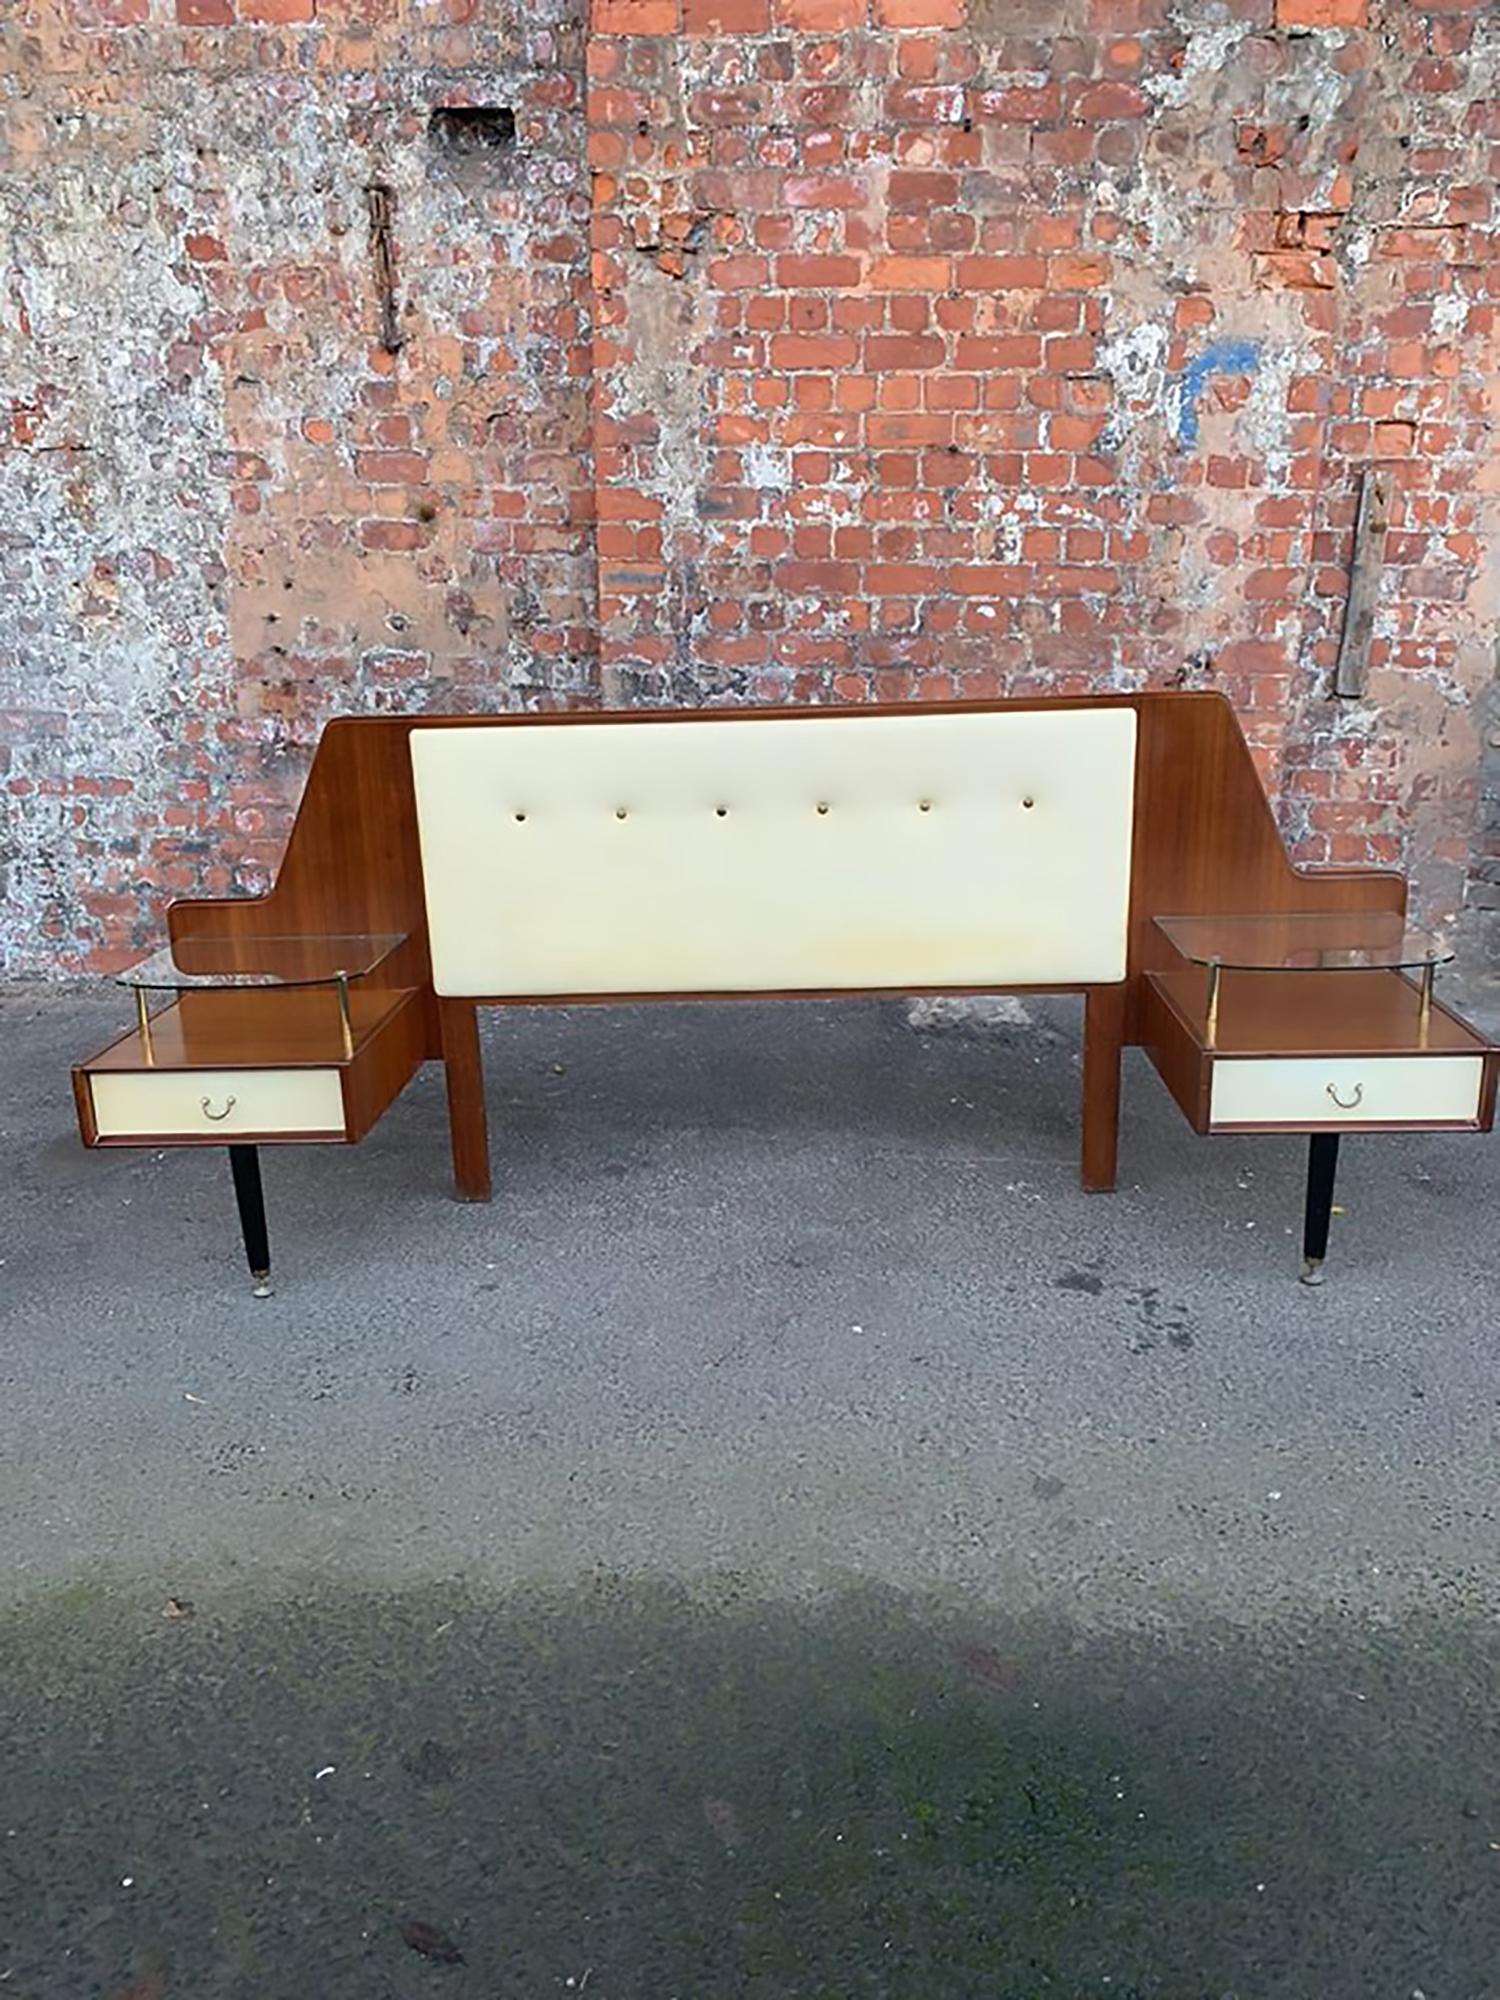 Lovely piece - ideal for any retro home. Very sought after design. Item is solid and sturdy. Some signs of wear - some small marks and scratches throughout, but all typical for used item
Width between bedside tables is 144 cm
Dimensions: height -